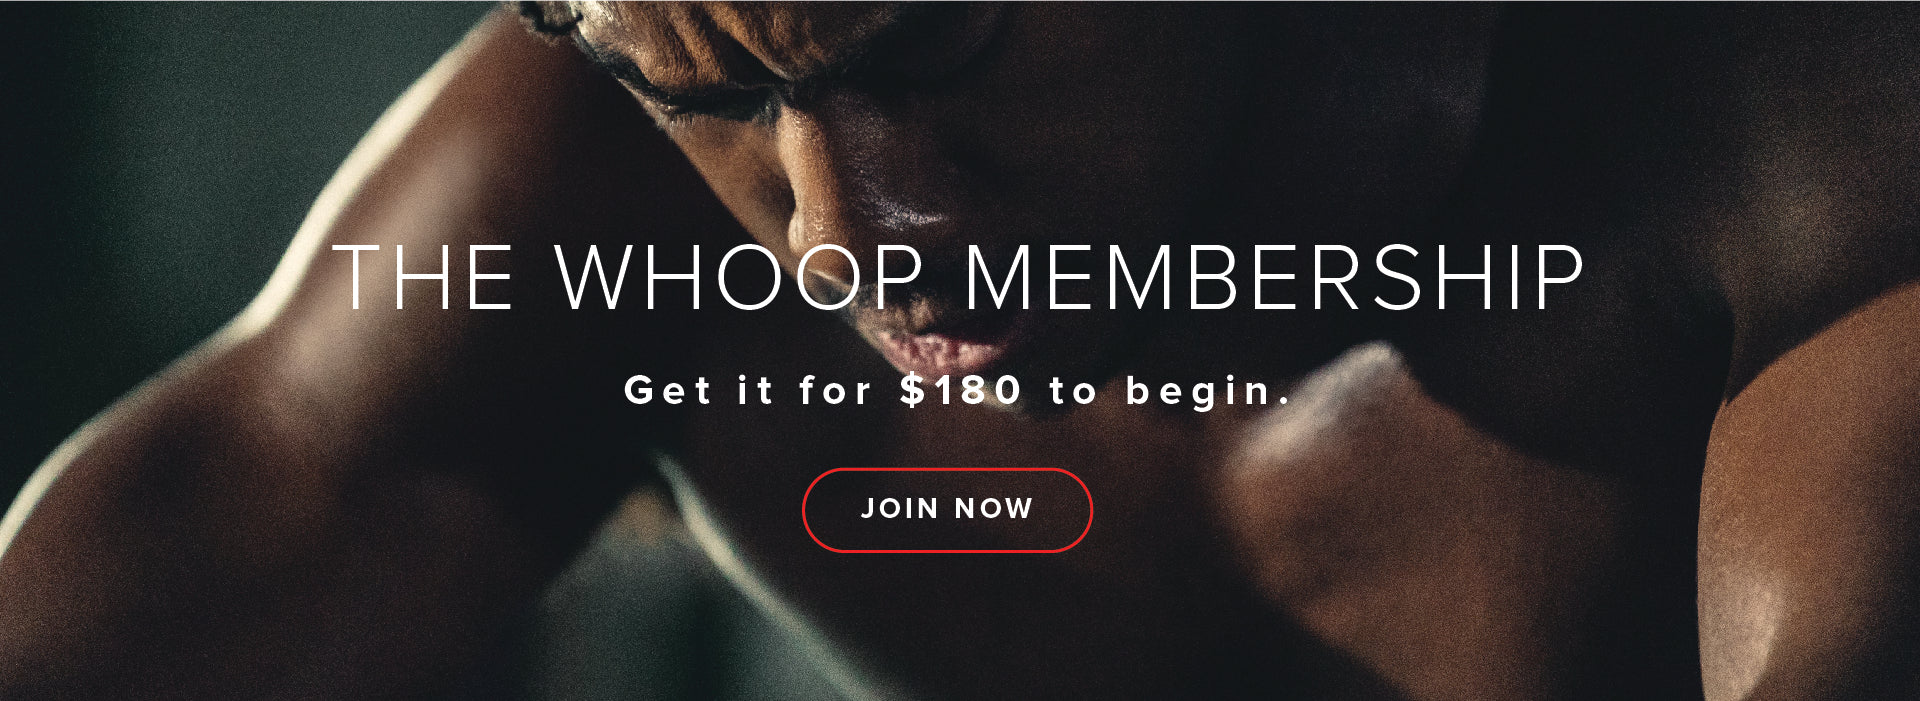 WHOOP Strap 2.0 adopts subscription-only pricing model